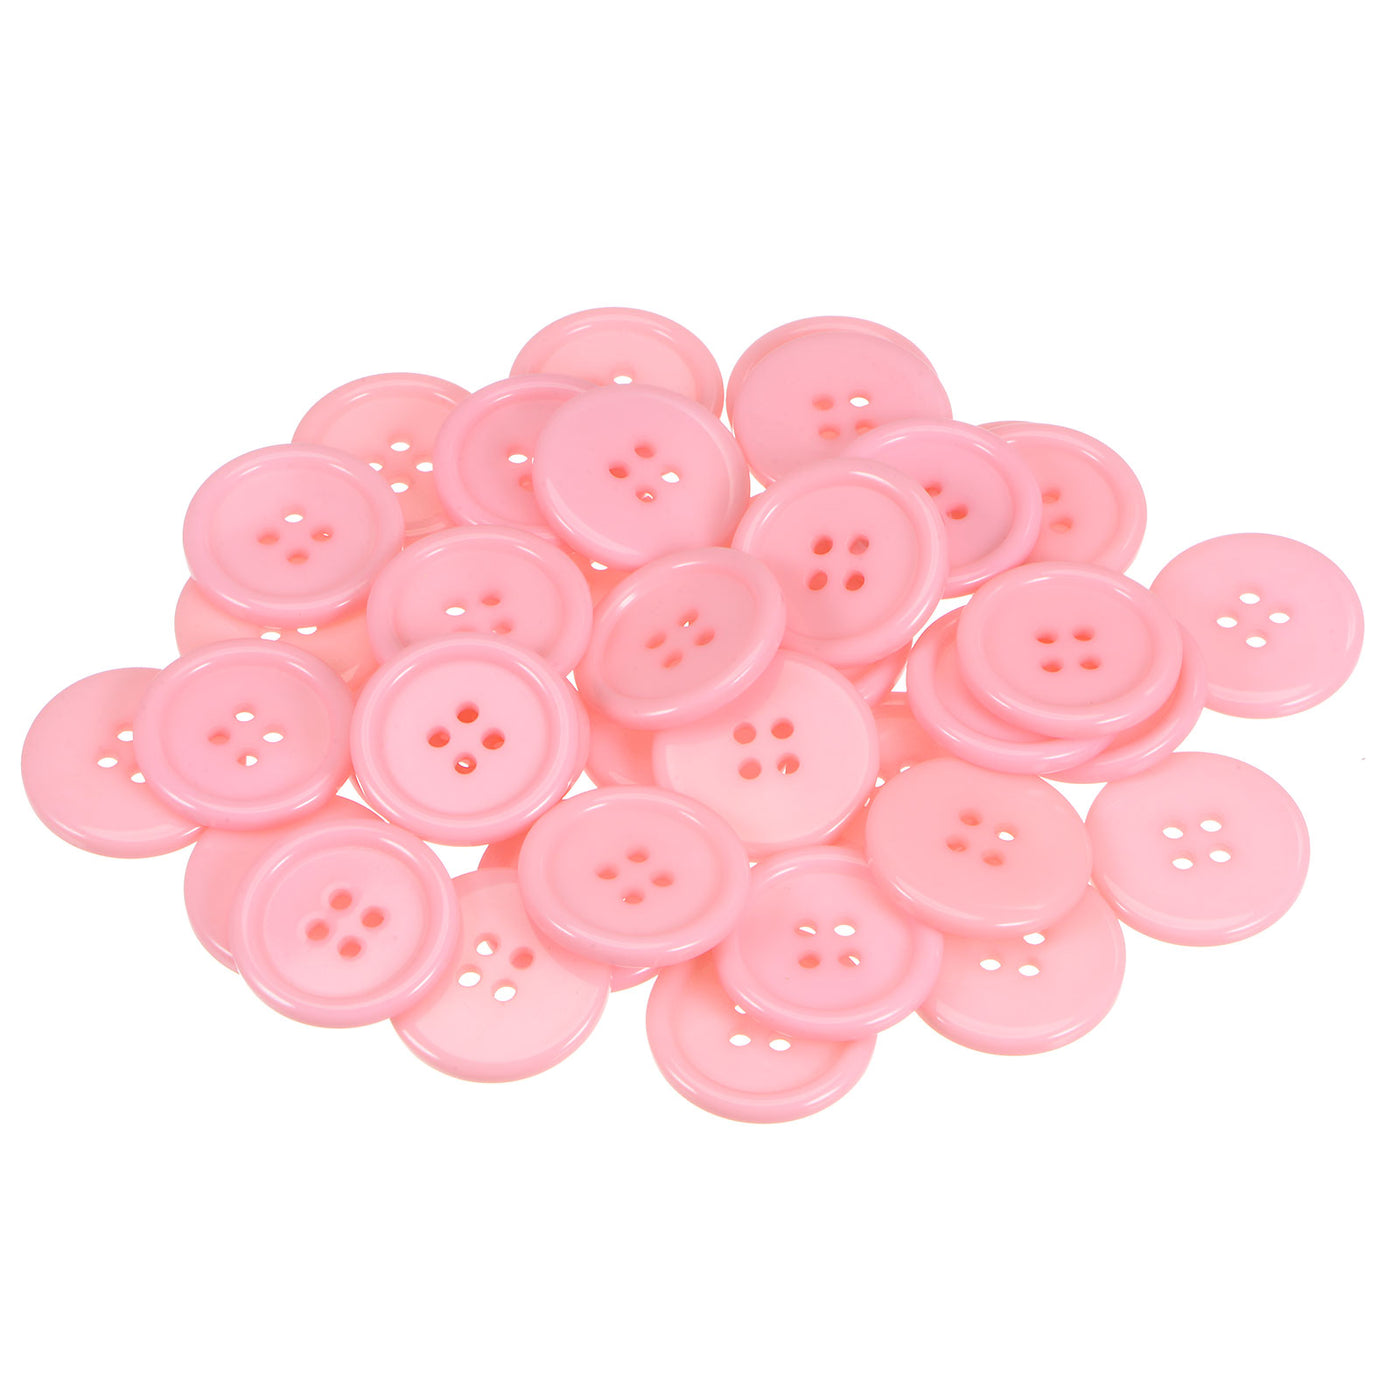 Harfington 100pcs 40L Sewing Buttons 1" Resin Round Flat 4-Hole Craft Buttons, Pink